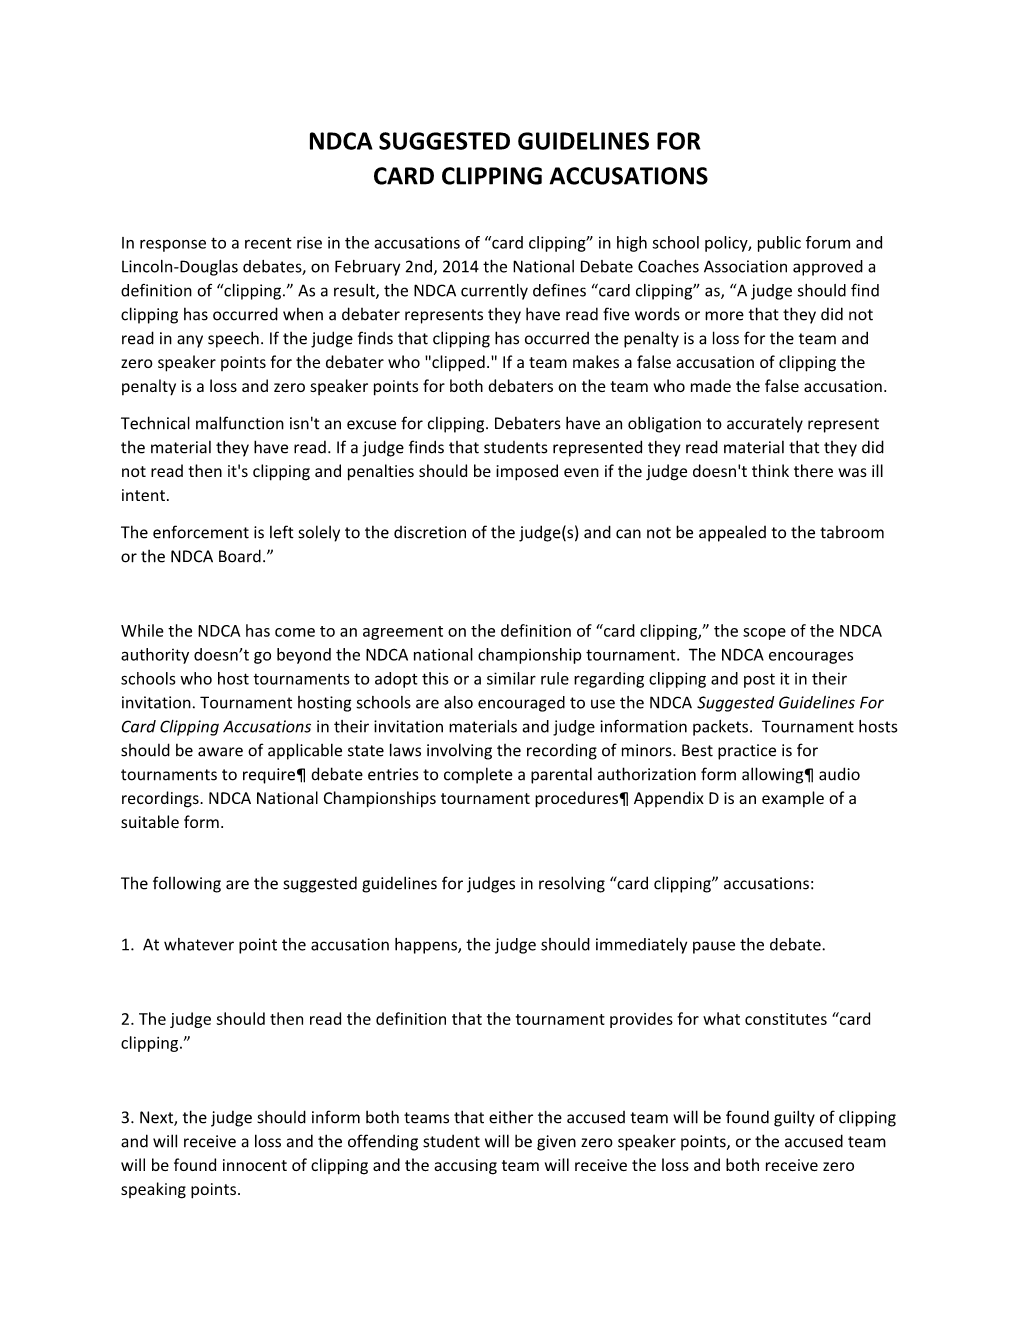 NDCA Suggested Guidelines for Card Clipping Accusations